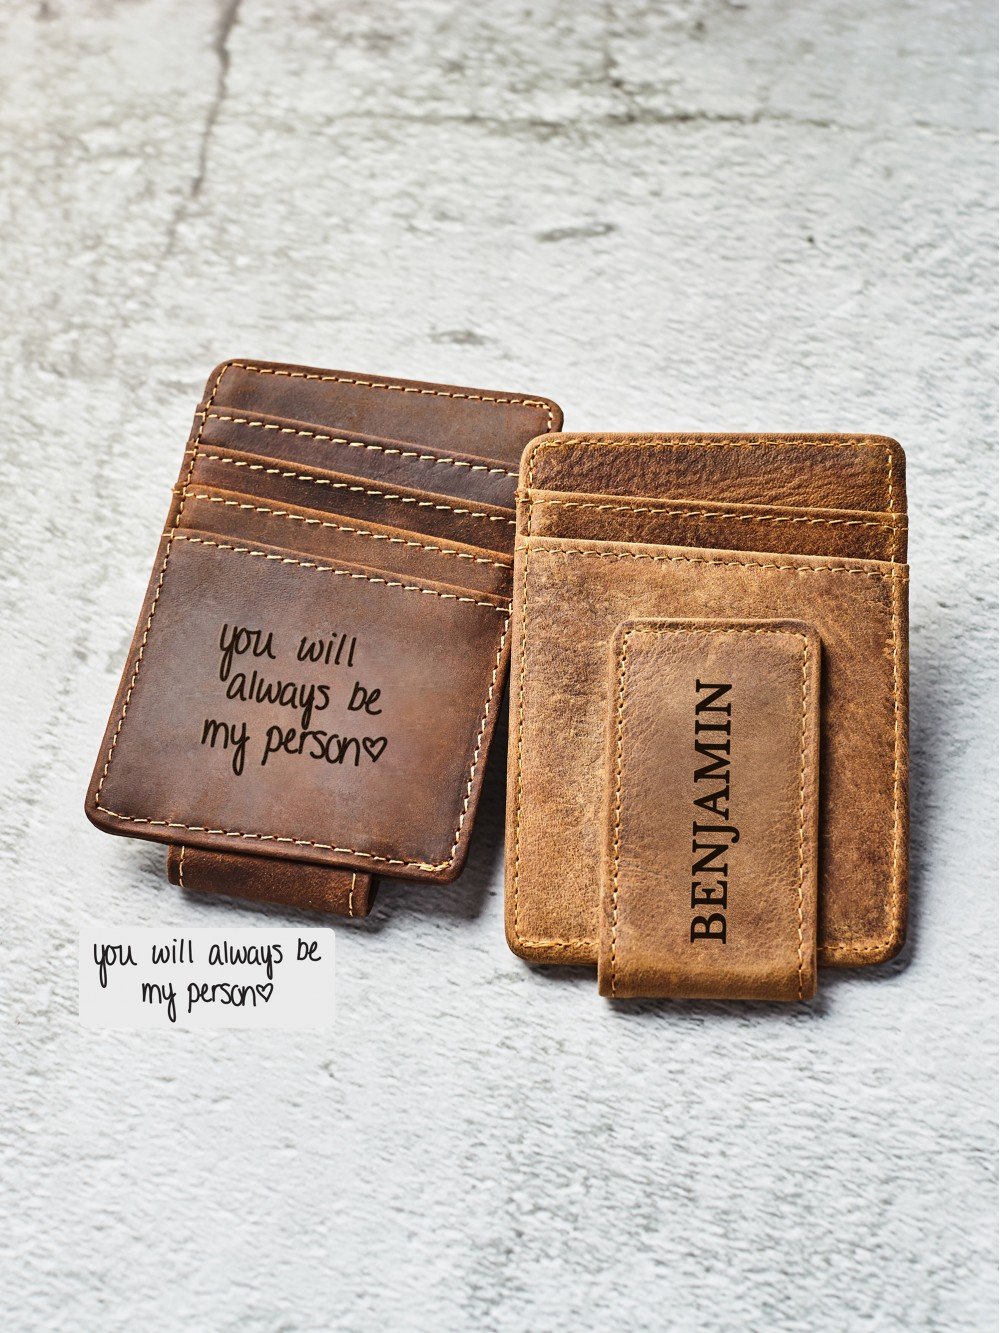 17 Great Leather Wallets for Men - Groovy Guy Gifts